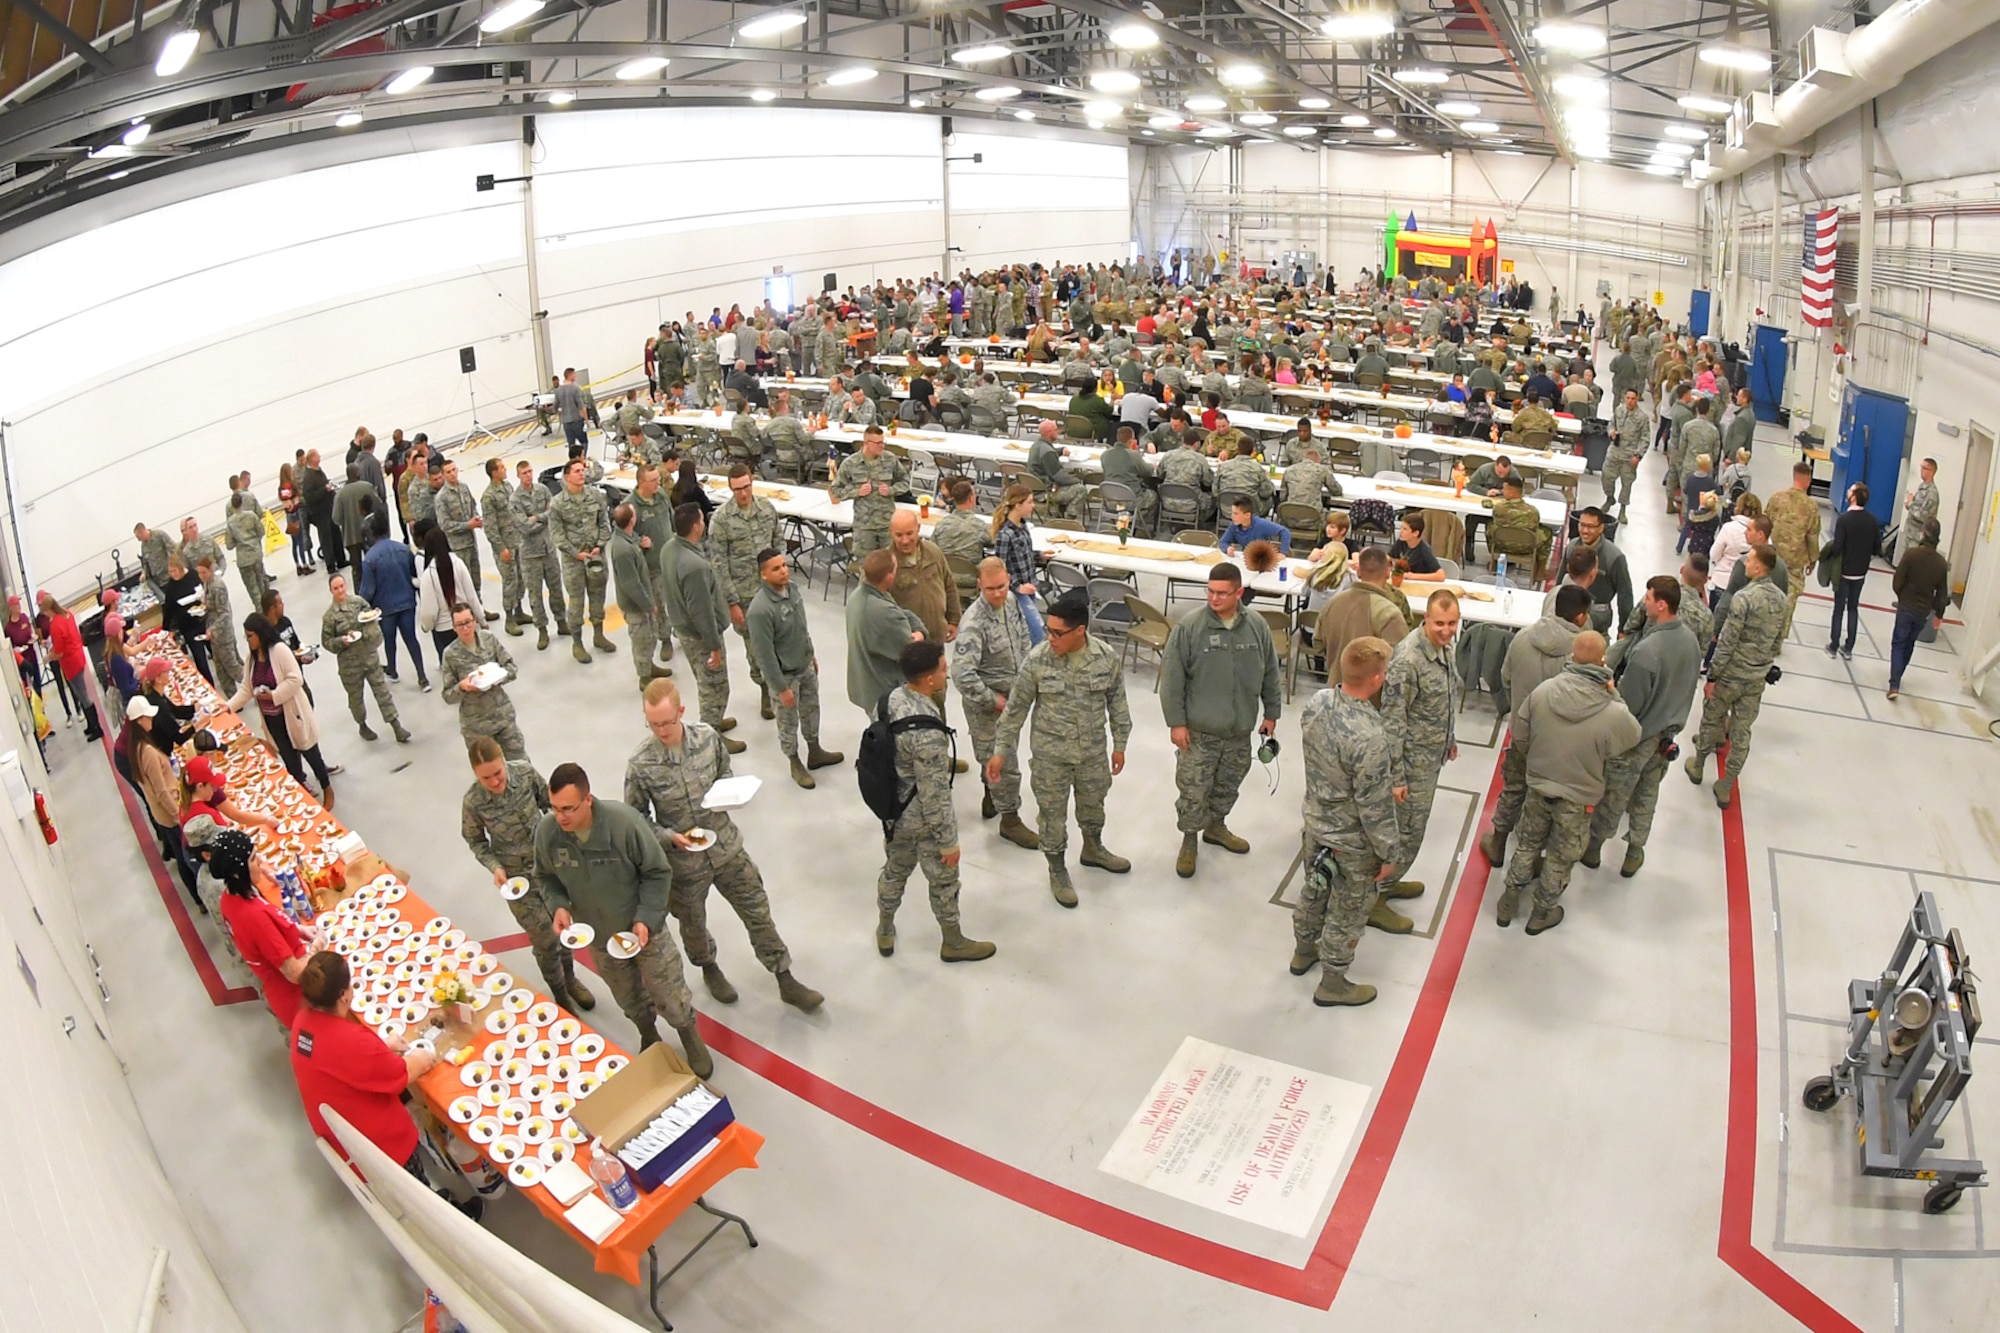 Hundreds of Airmen from the 419th and 388th Fighter Wings gather in an F-35 hangar for an early Thanksgiving Nov. 21. at Hill Air Force Base, Utah.